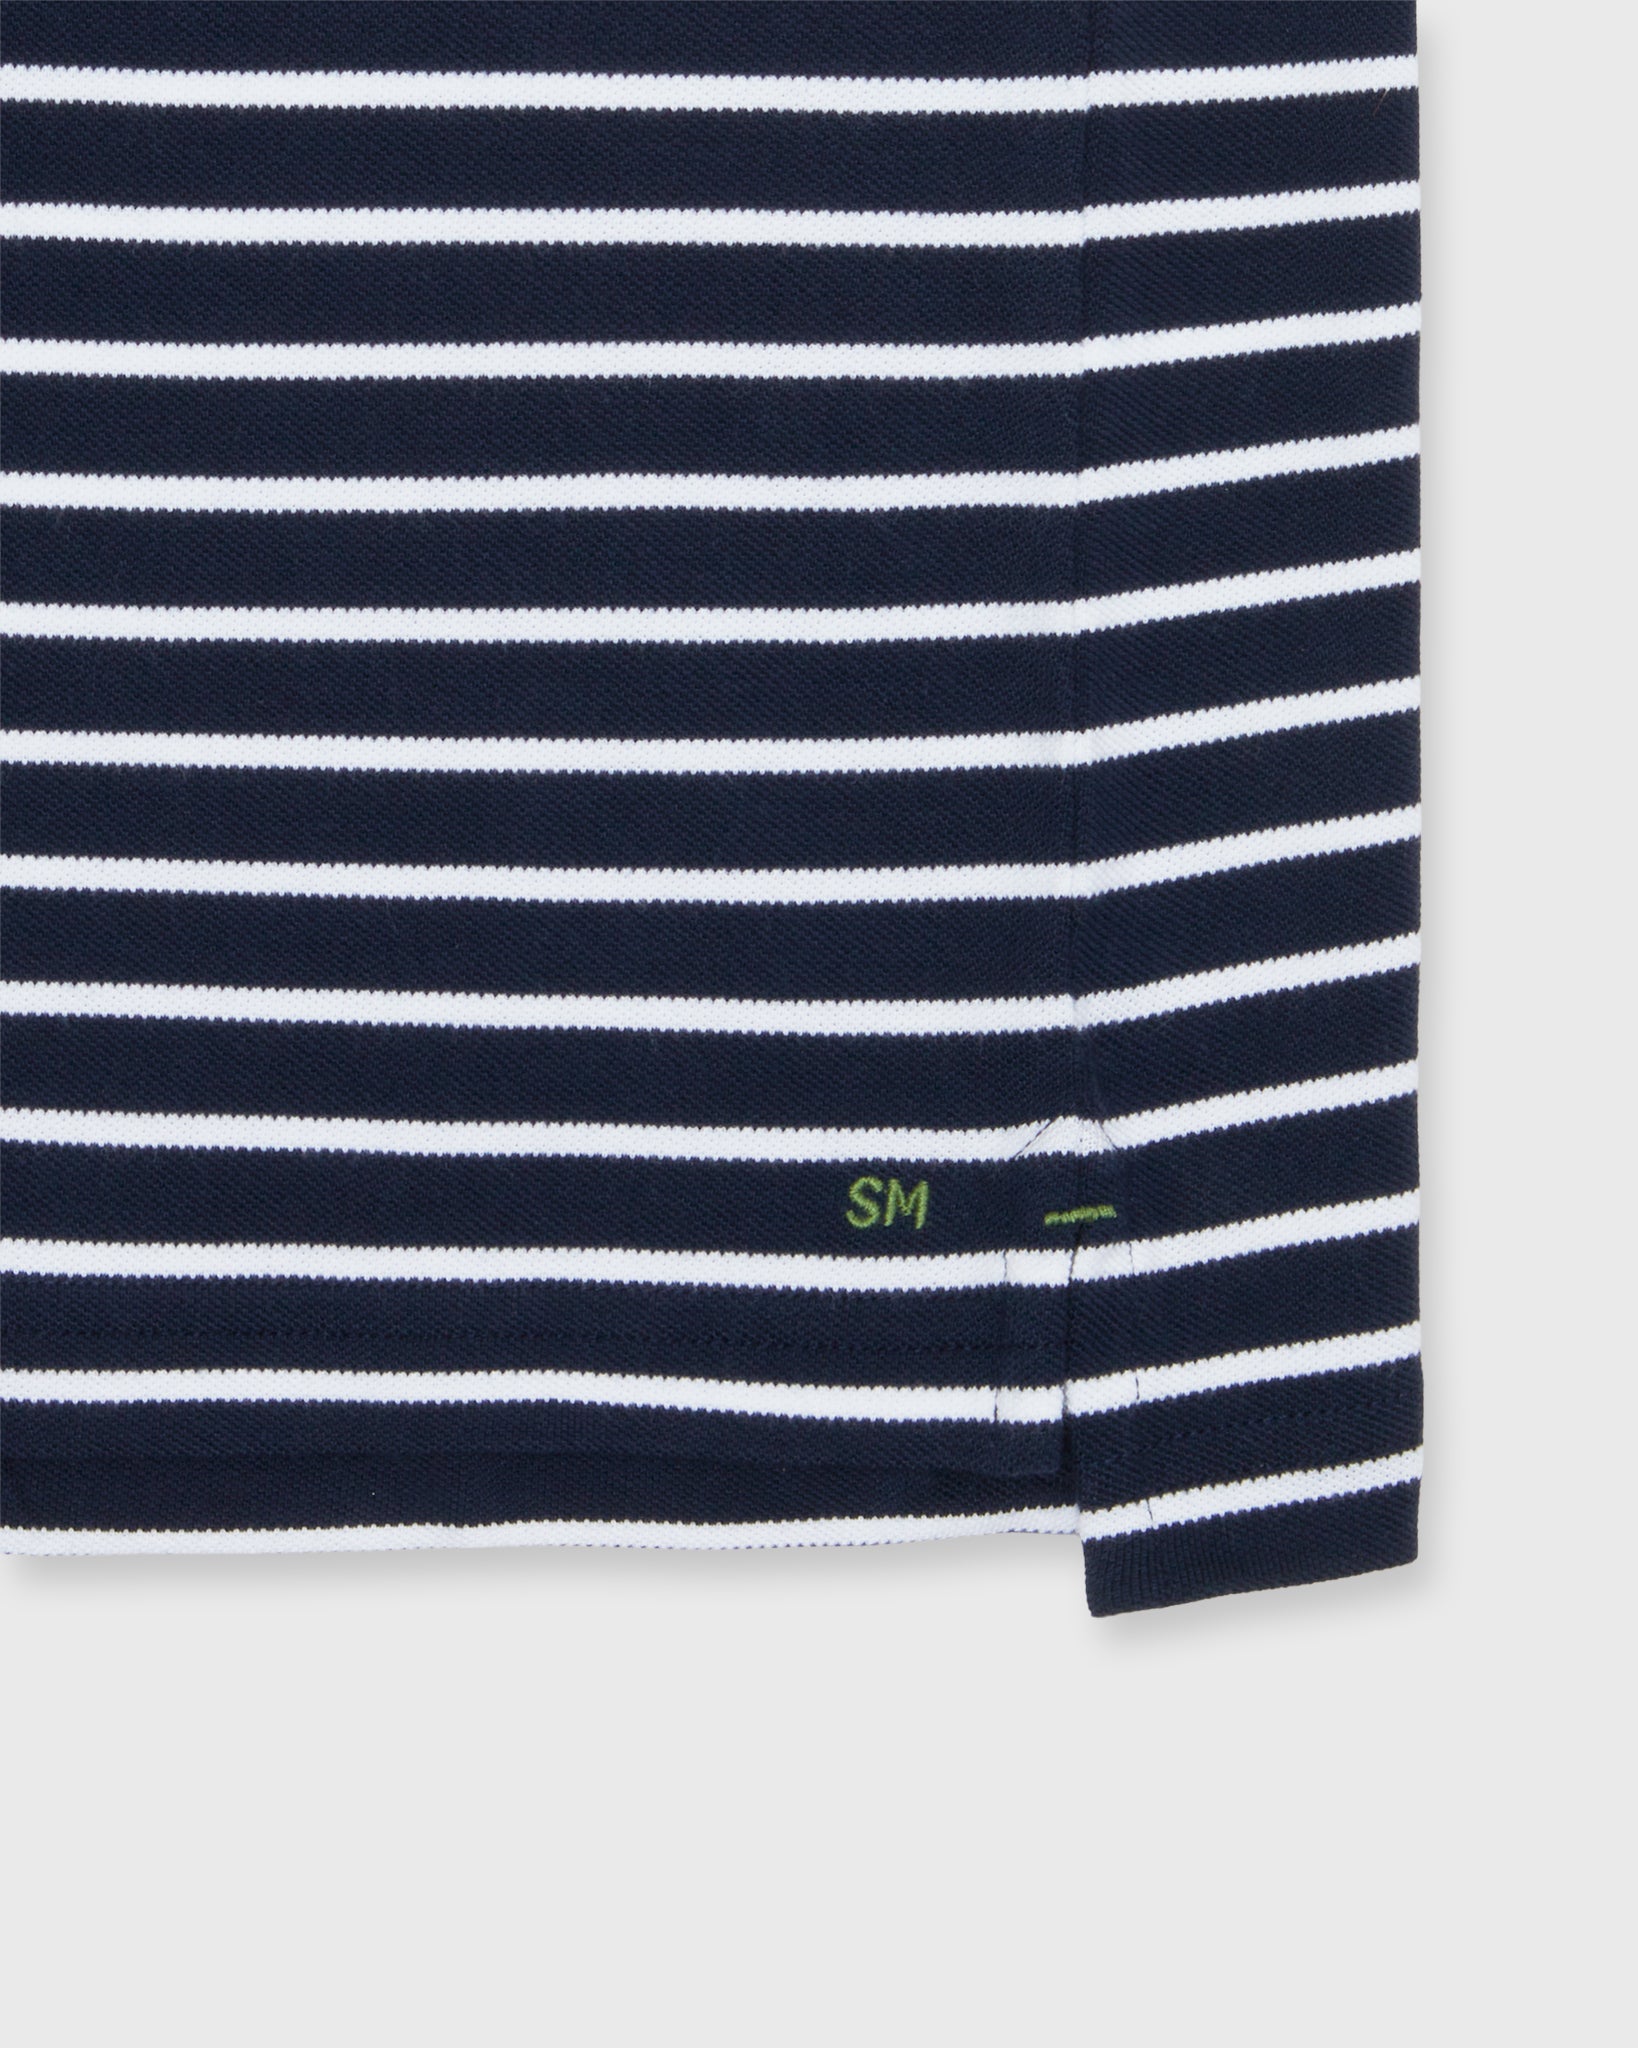 Short-Sleeved Polo in Navy/White Wide Stripe Pima Pique